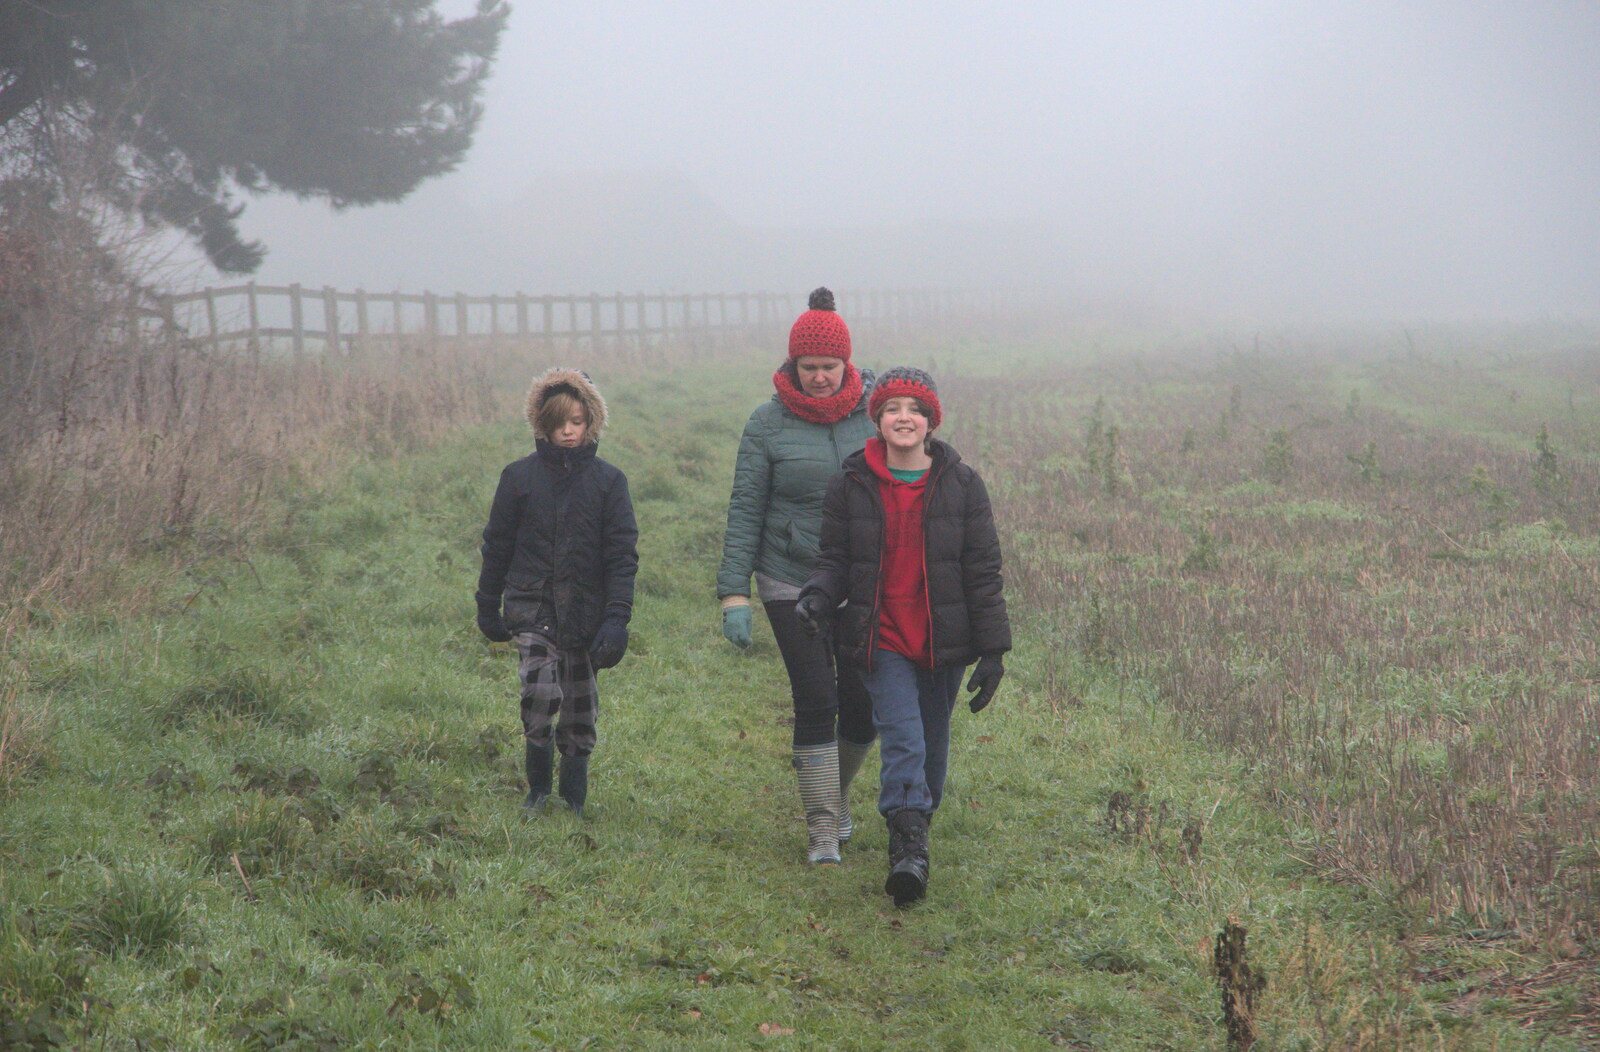 The gang walk back from Chinner's field from Fun With Ice in Lockdown, Brome, Suffolk - 10th January 2021